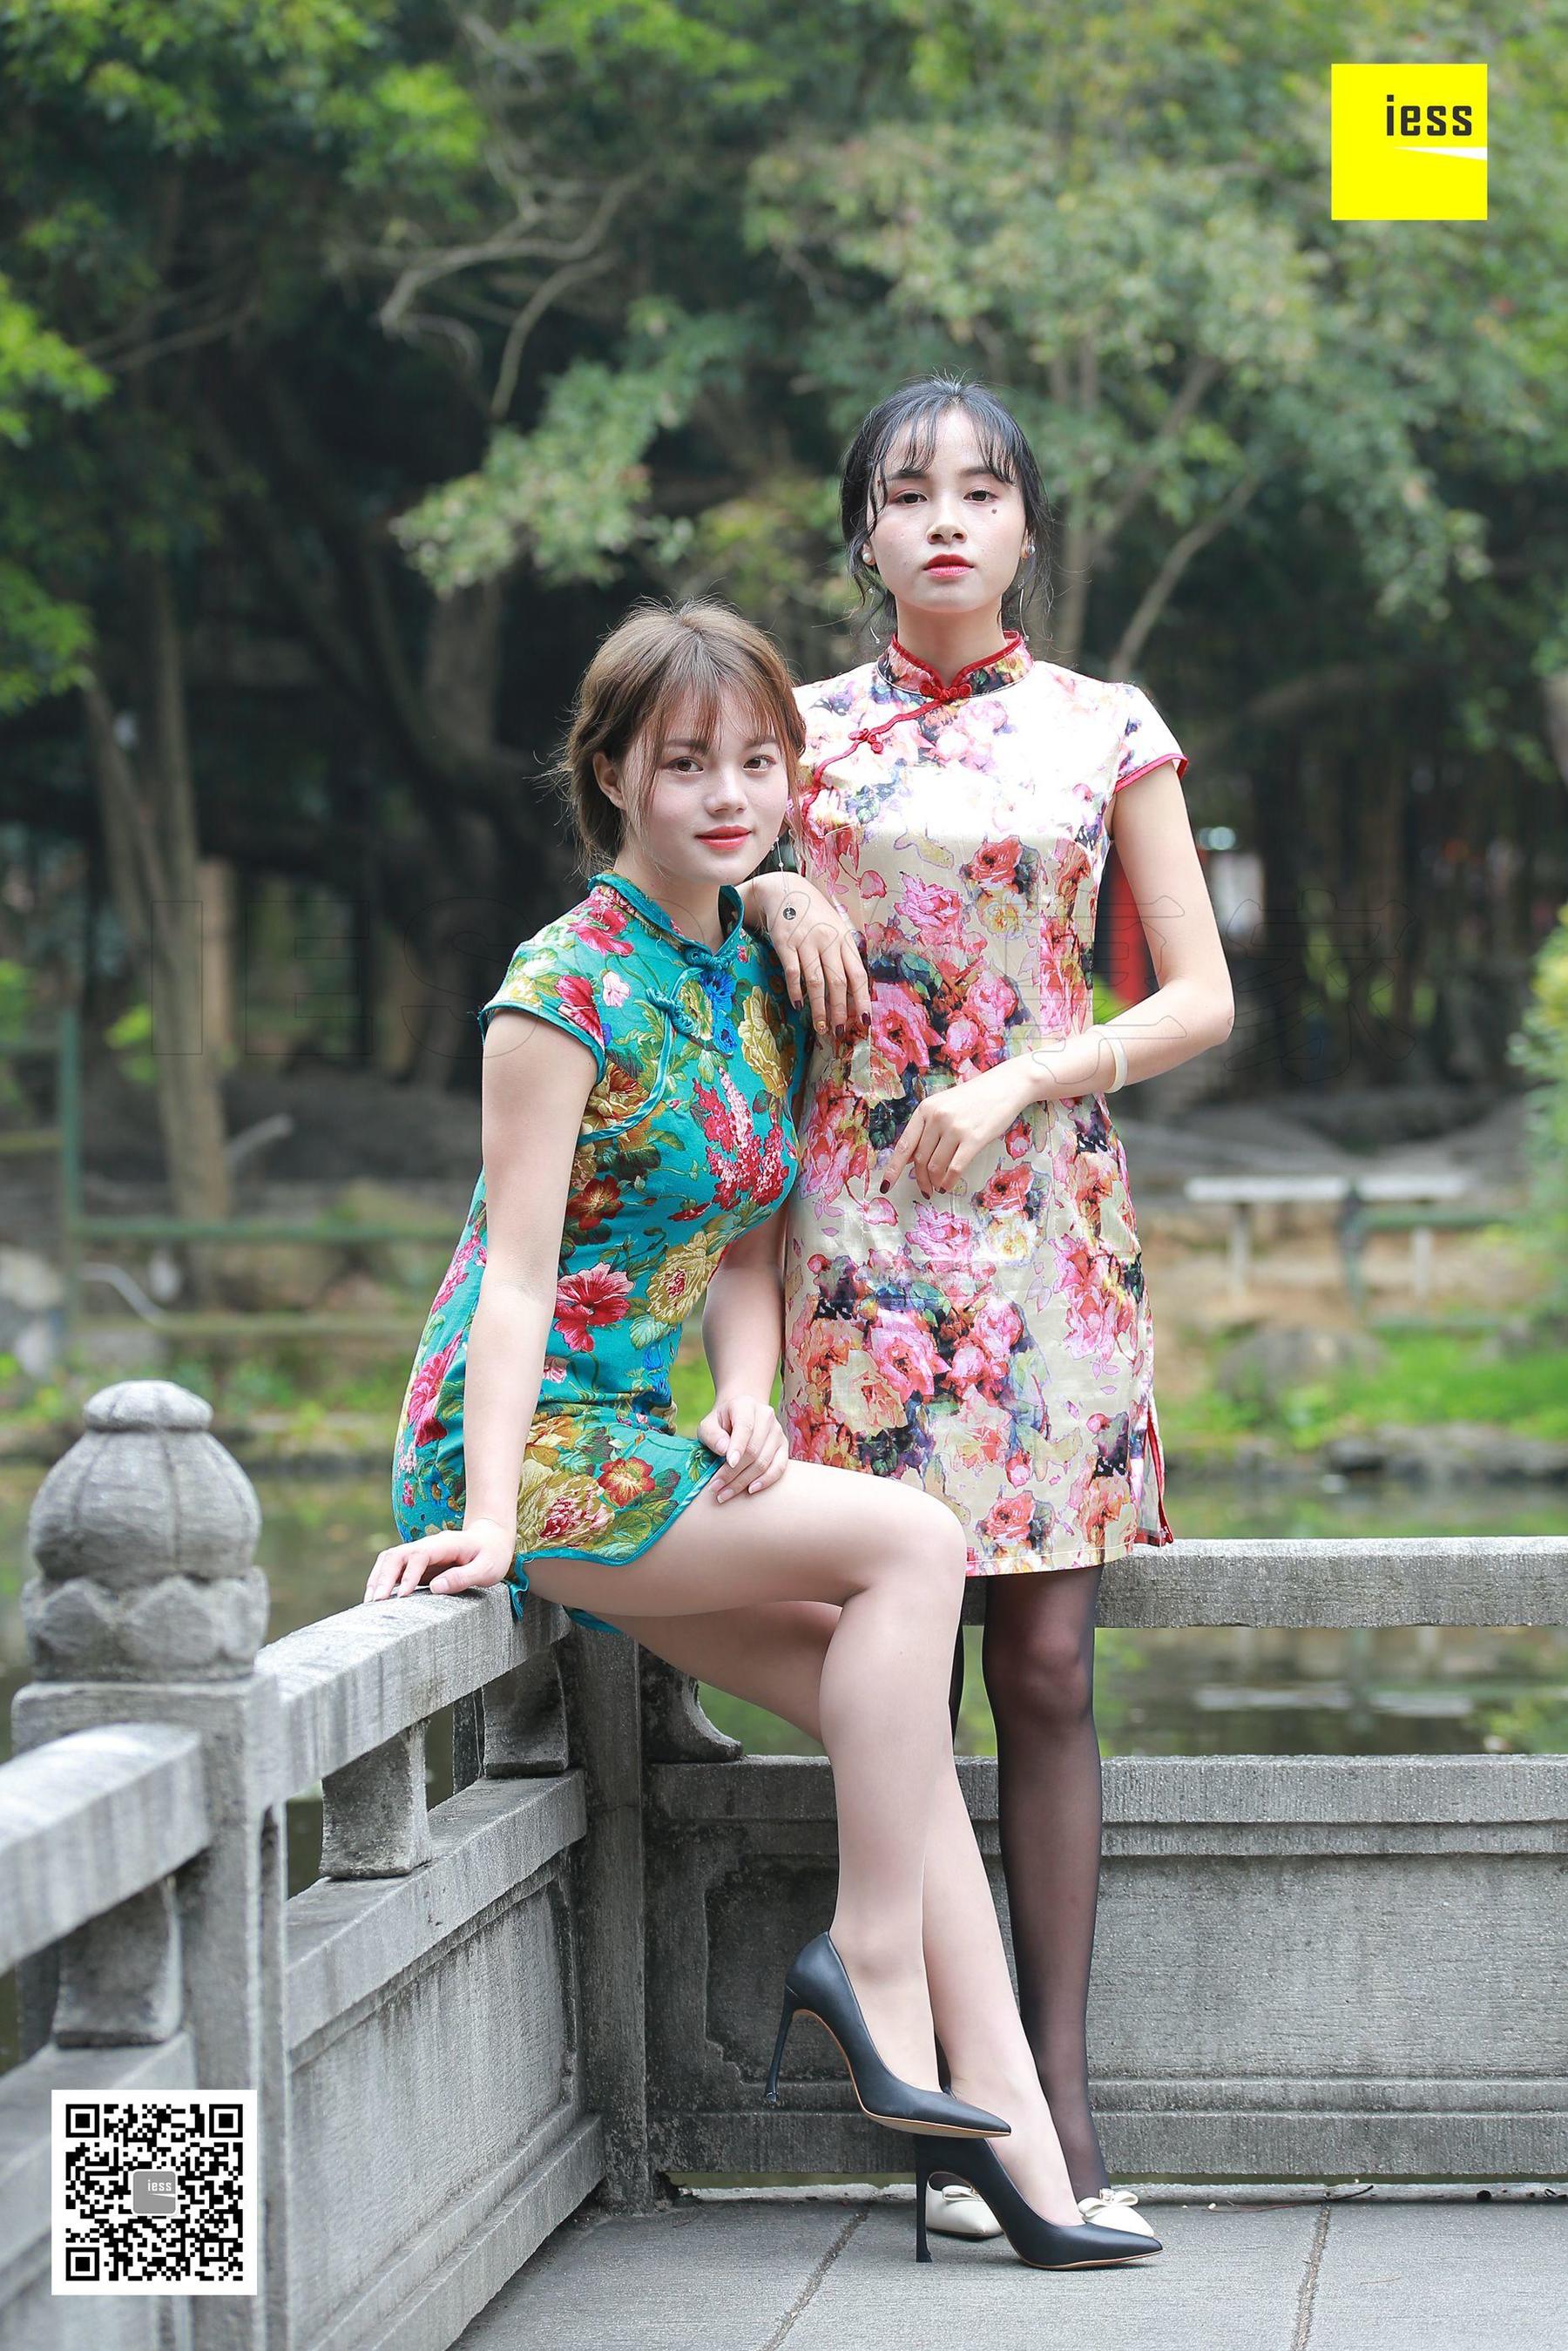 Shuying & amp; Huahua’s Cheongsam Period Flowers Different Thoughts to IESS Devil on Wednesday Special issue 12